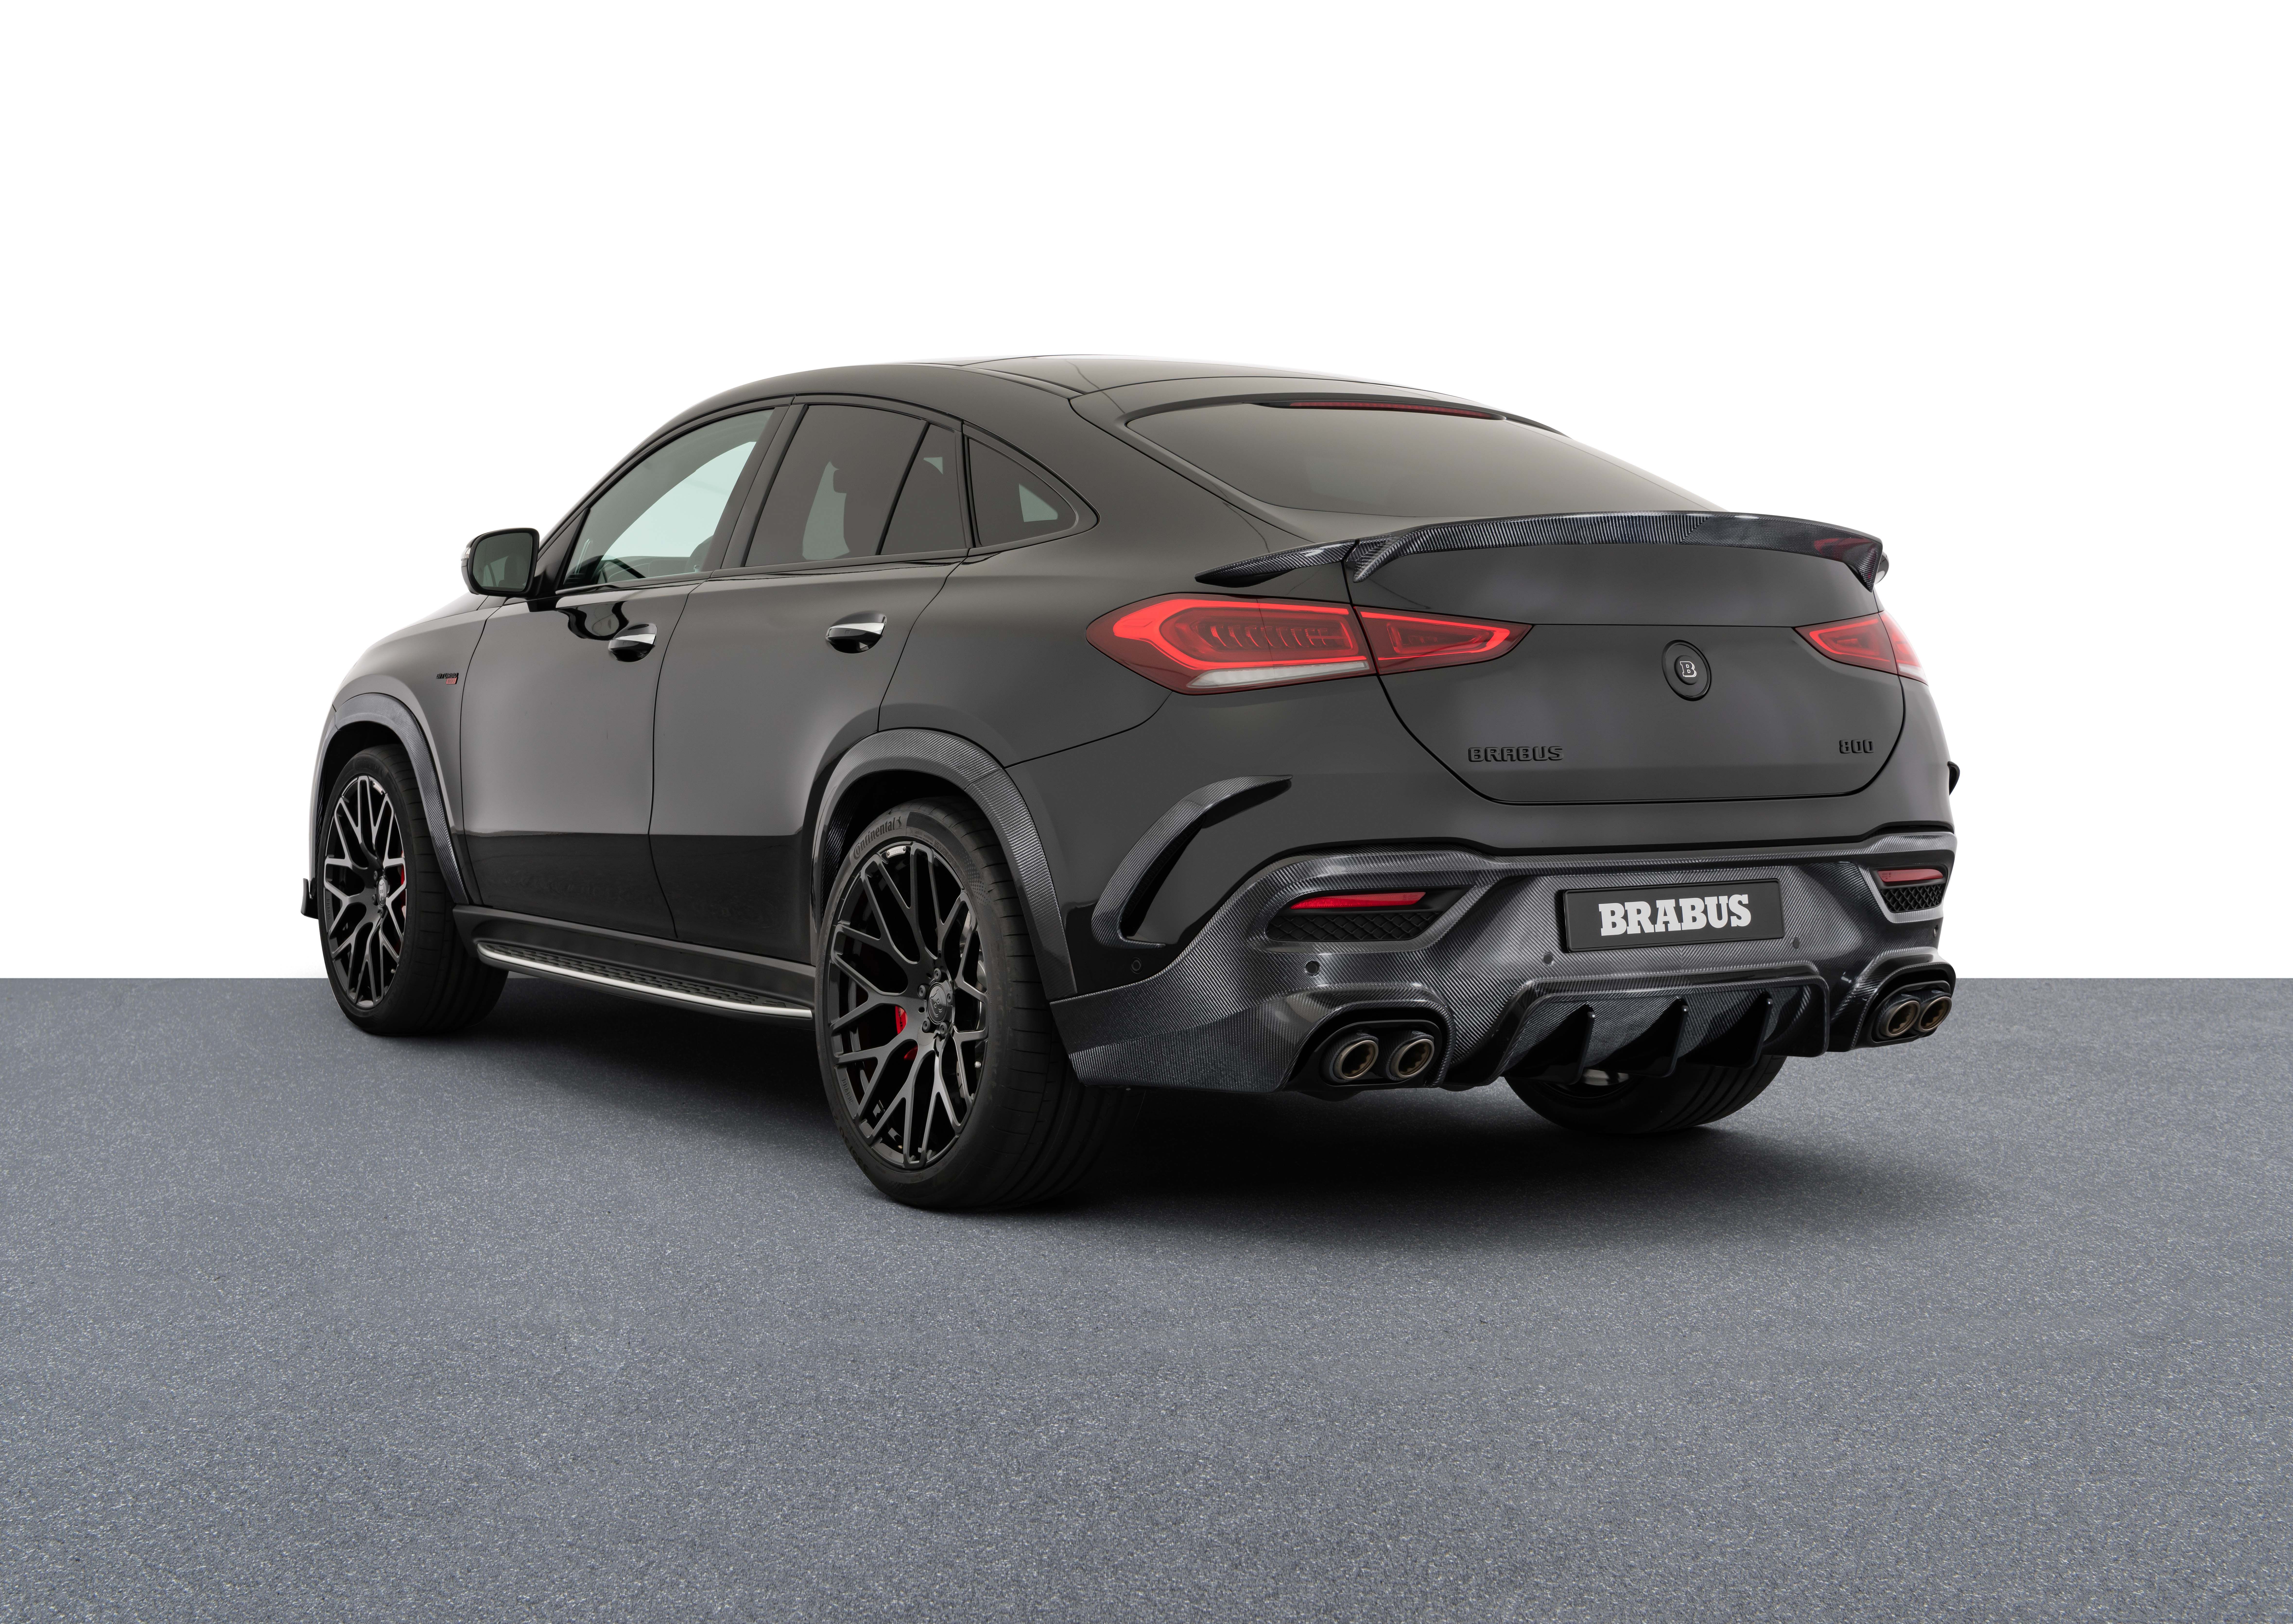 2021 Brabus 800 - The Mercedes-AMG GLE 63 S Receives The Brabus Treatment